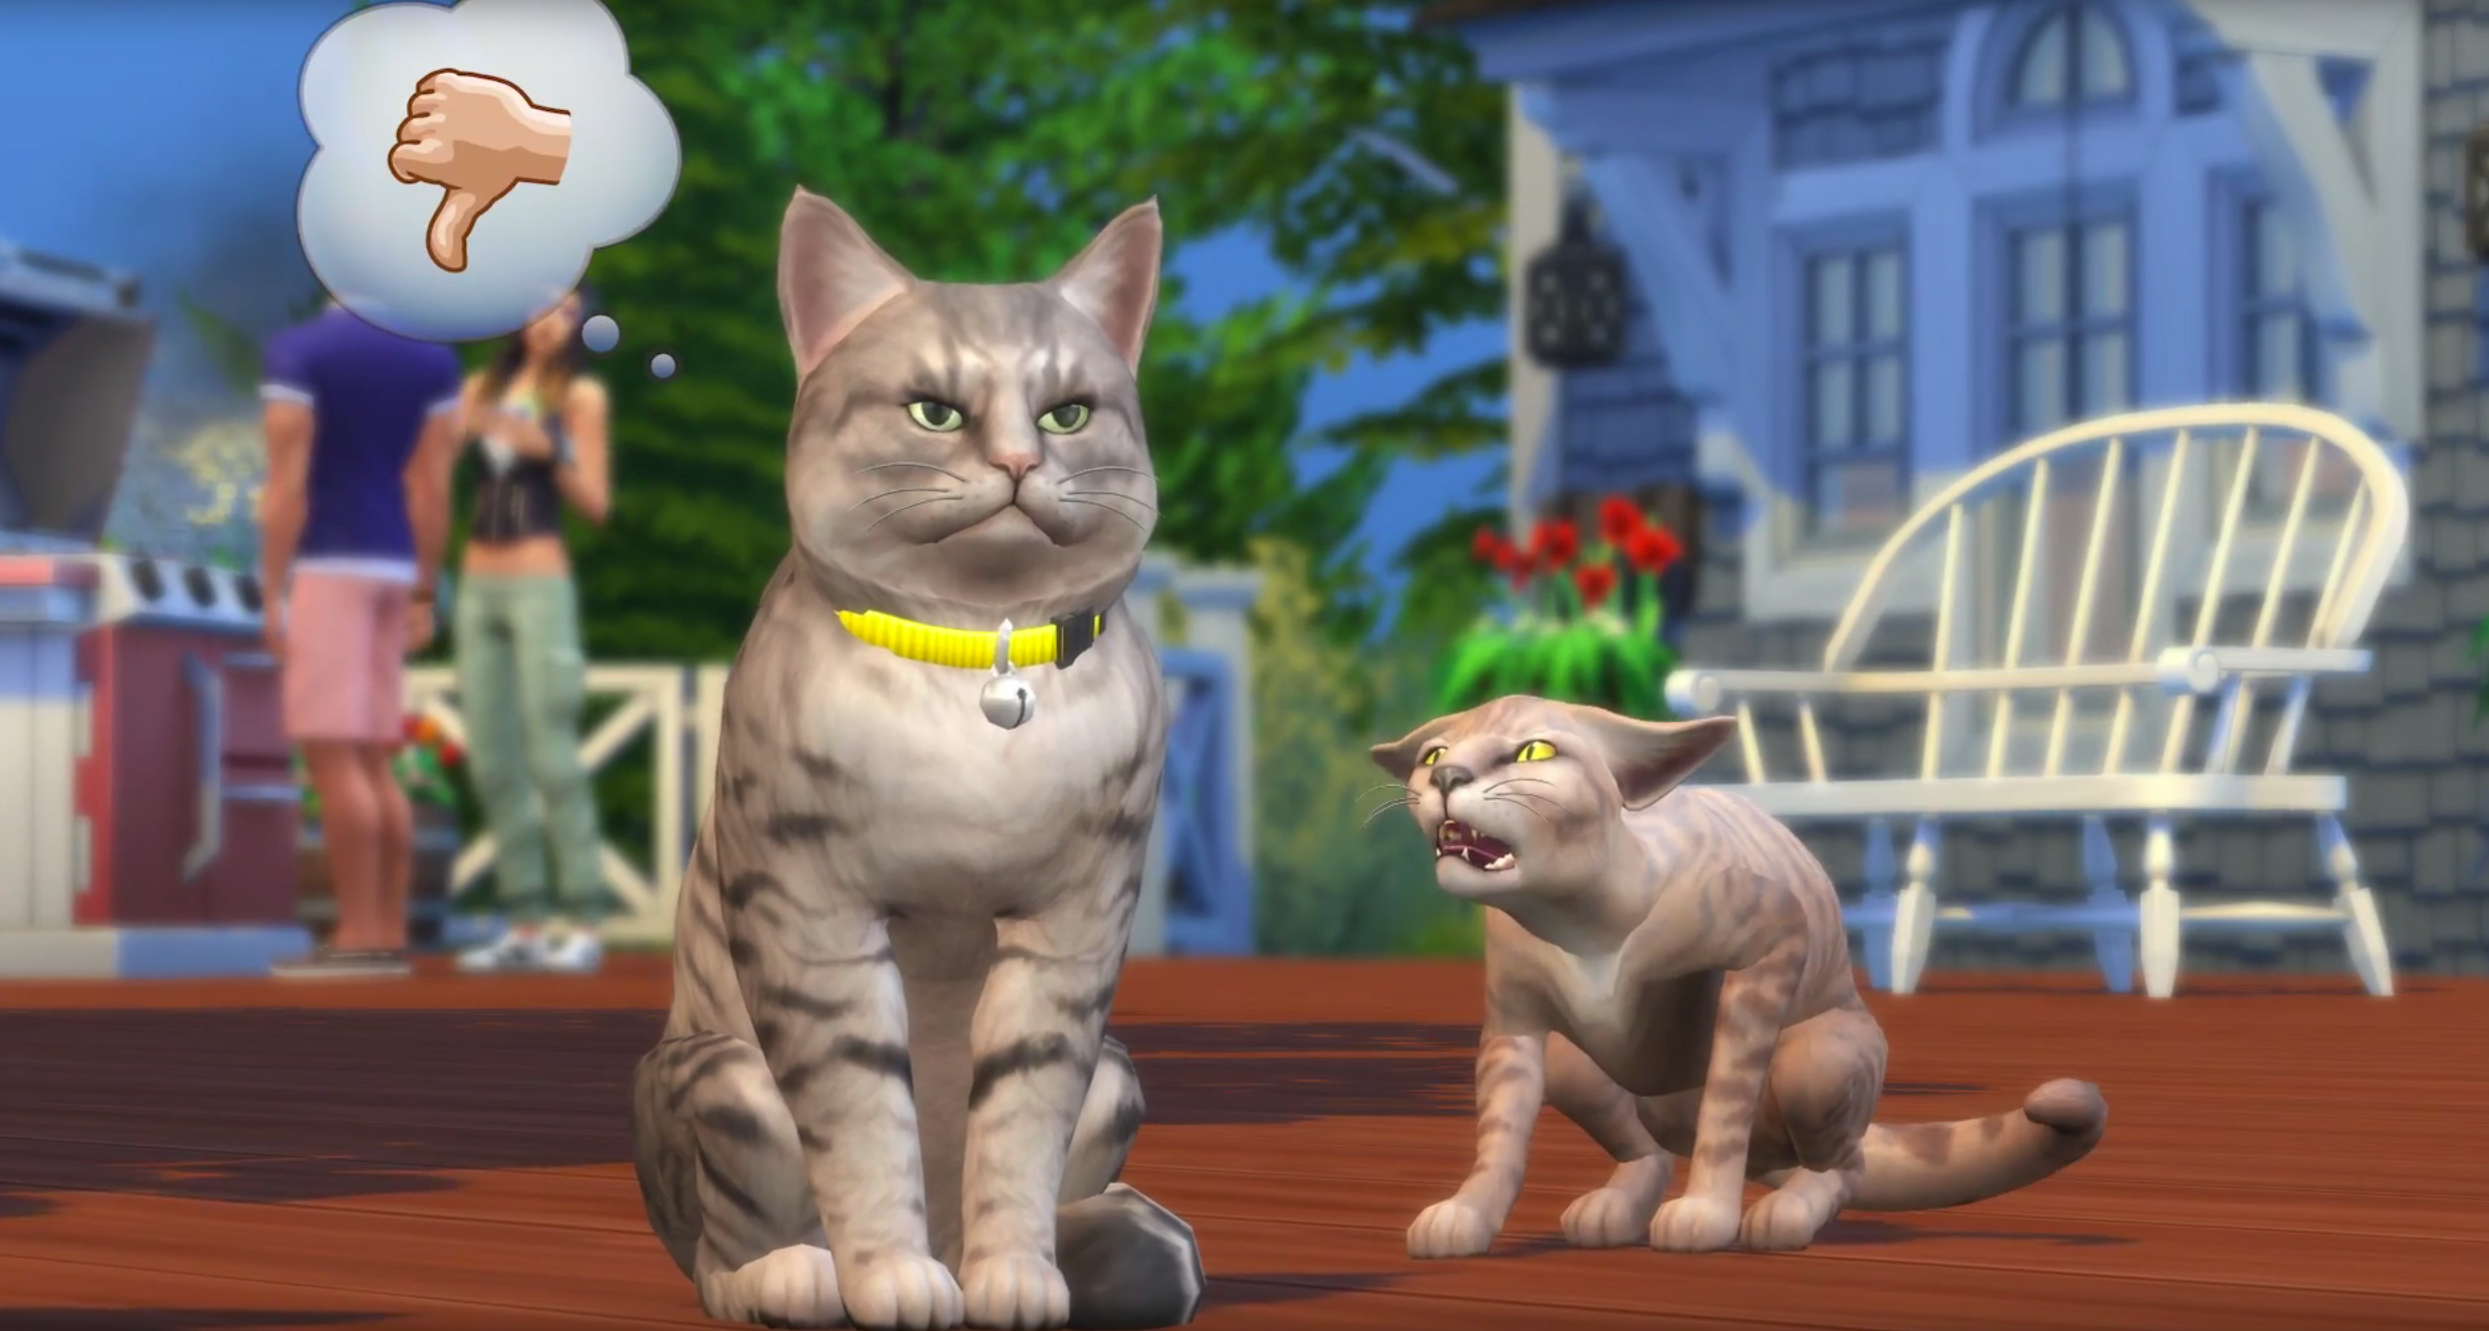 ‘The Sims 4’ Game Is Getting Customizable Pets